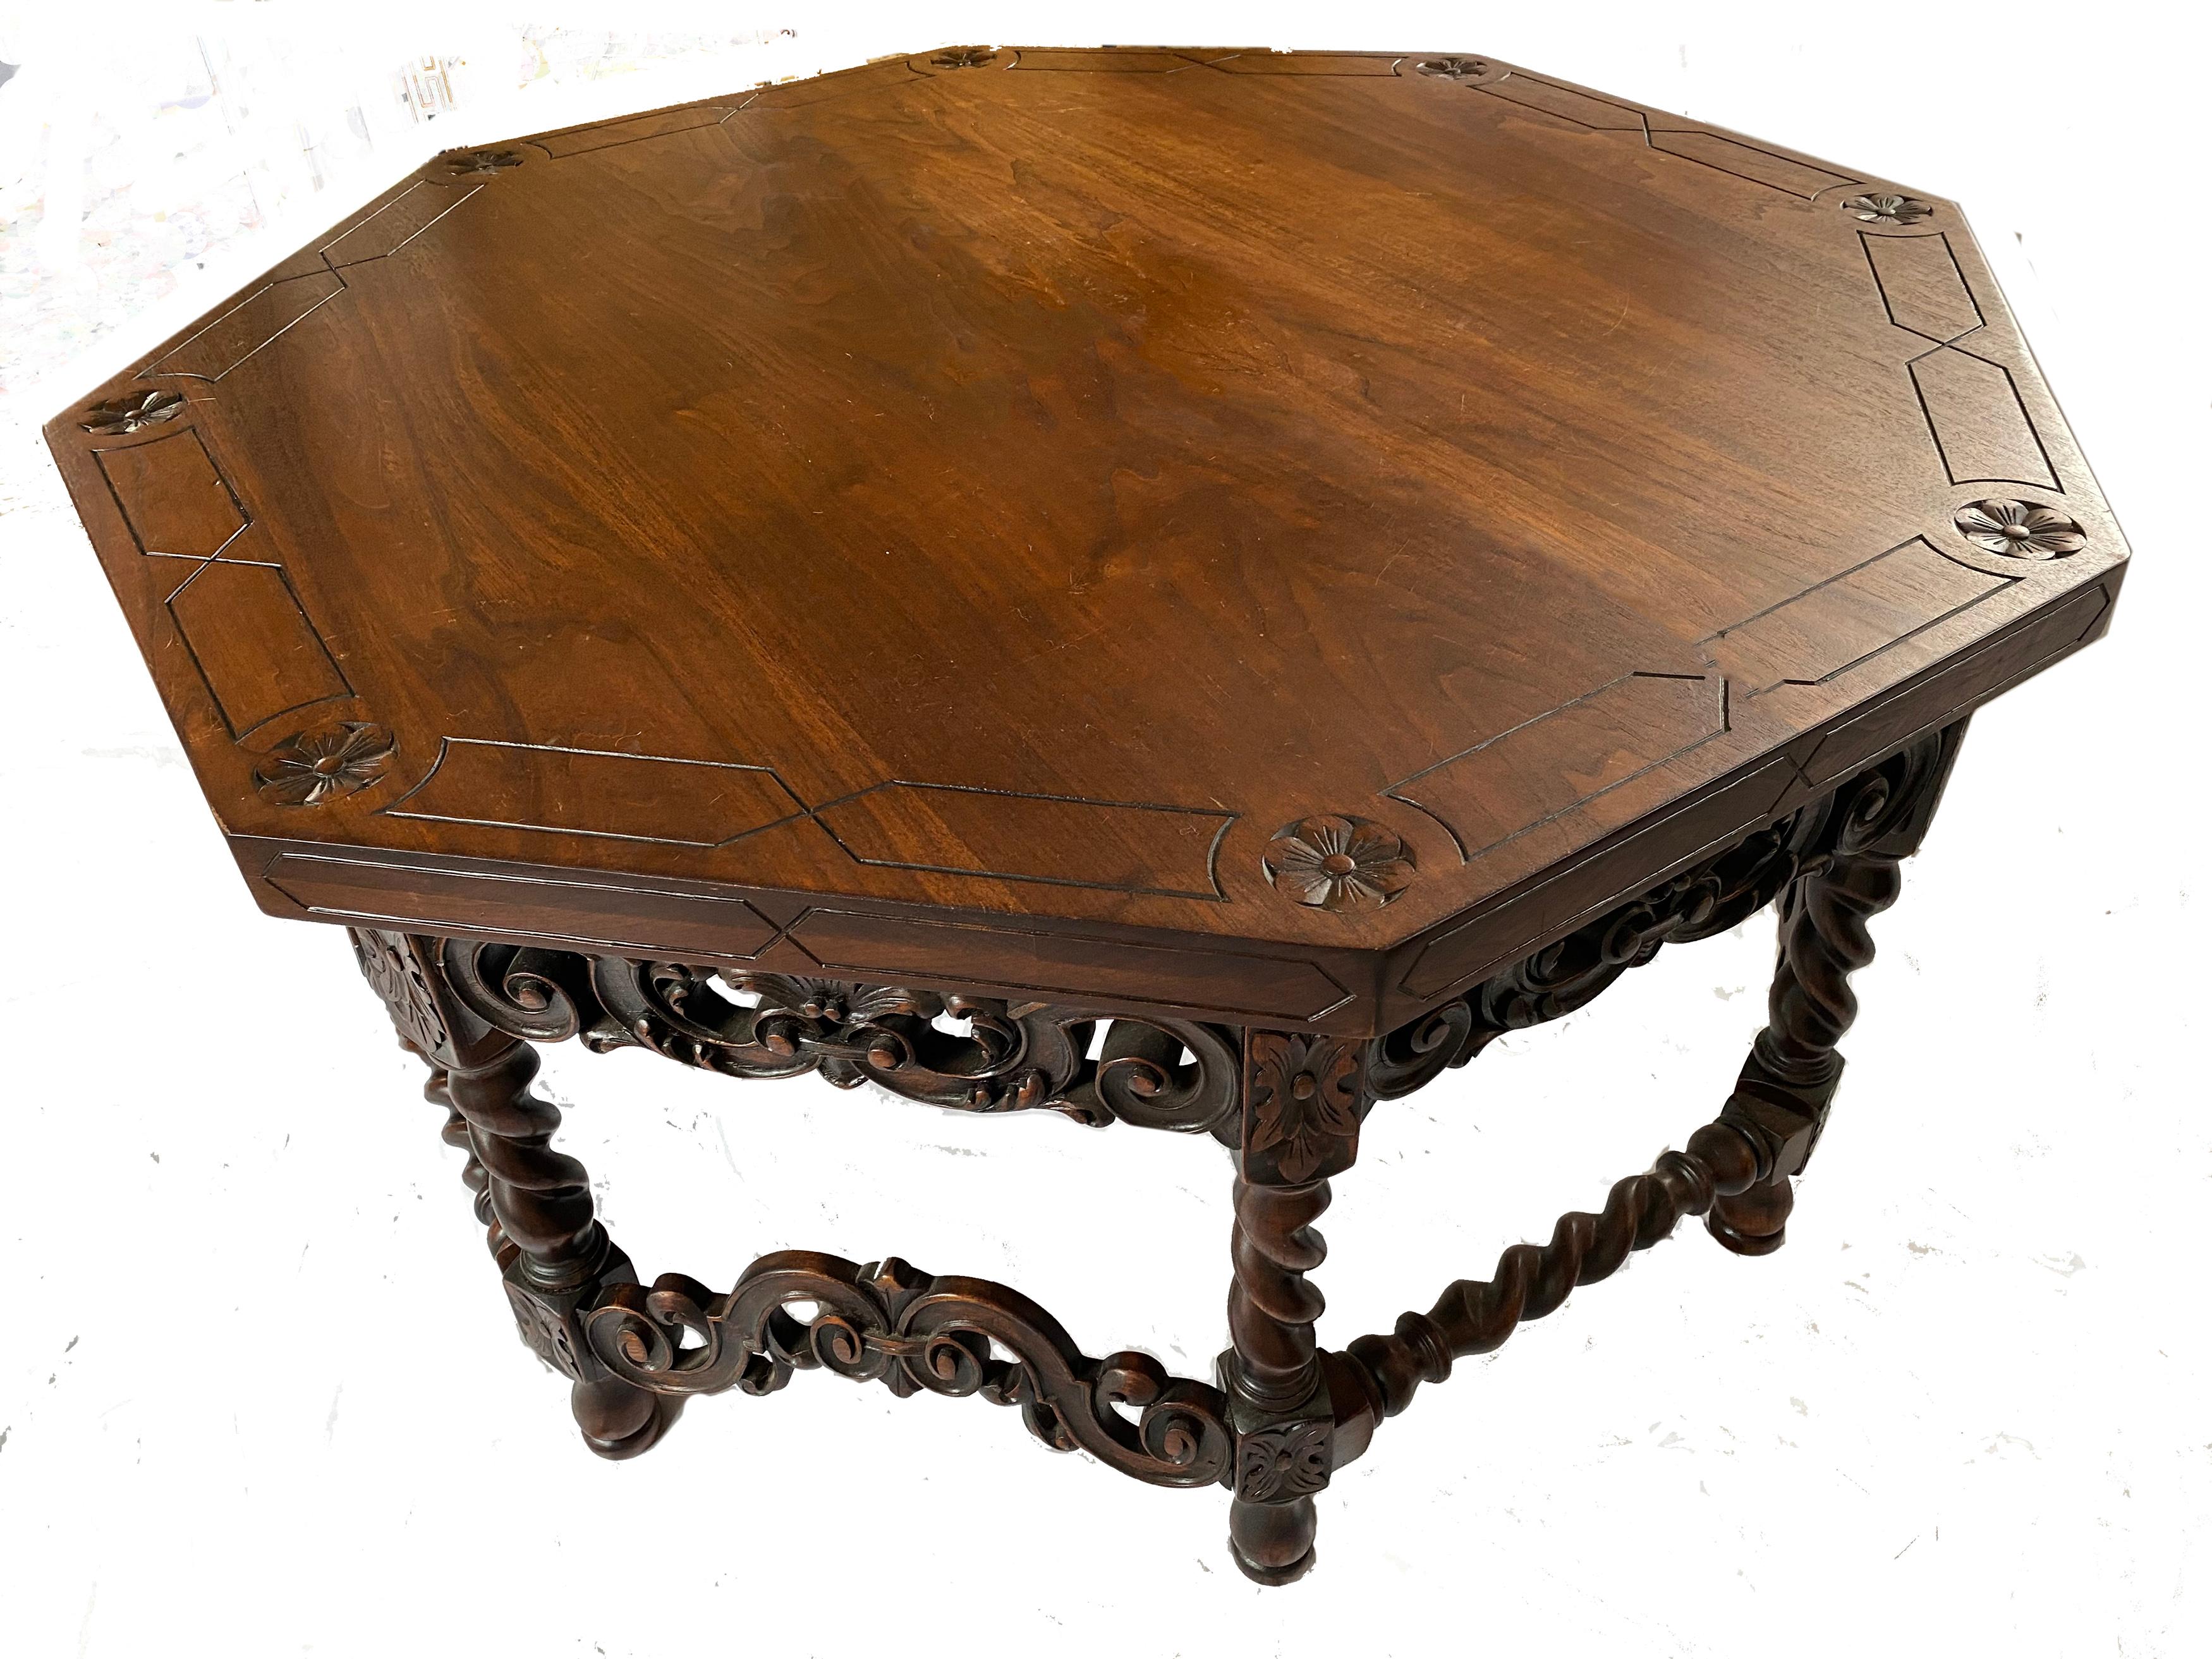 Unique antique octagon center (or coffee) table with a major presence with hand carved details and barley twist legs and stretchers. Has a mix of Jacobean and Eastlake details that give this table flexibility to fit into a number of traditional